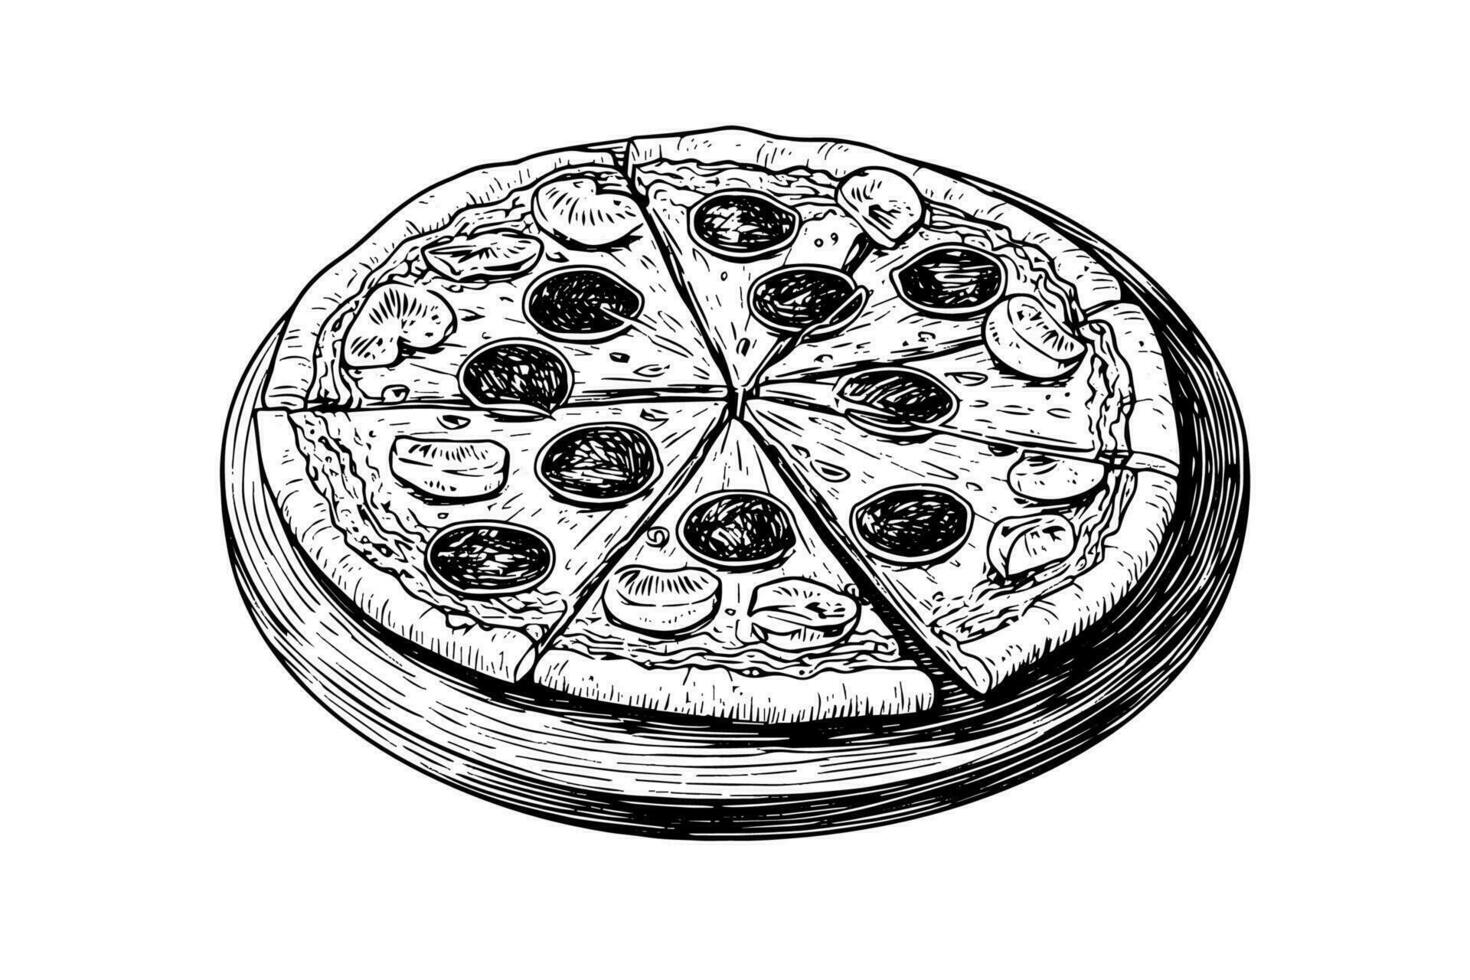 Sliced pizza sketch hand drawn engraving style Vector illustration.